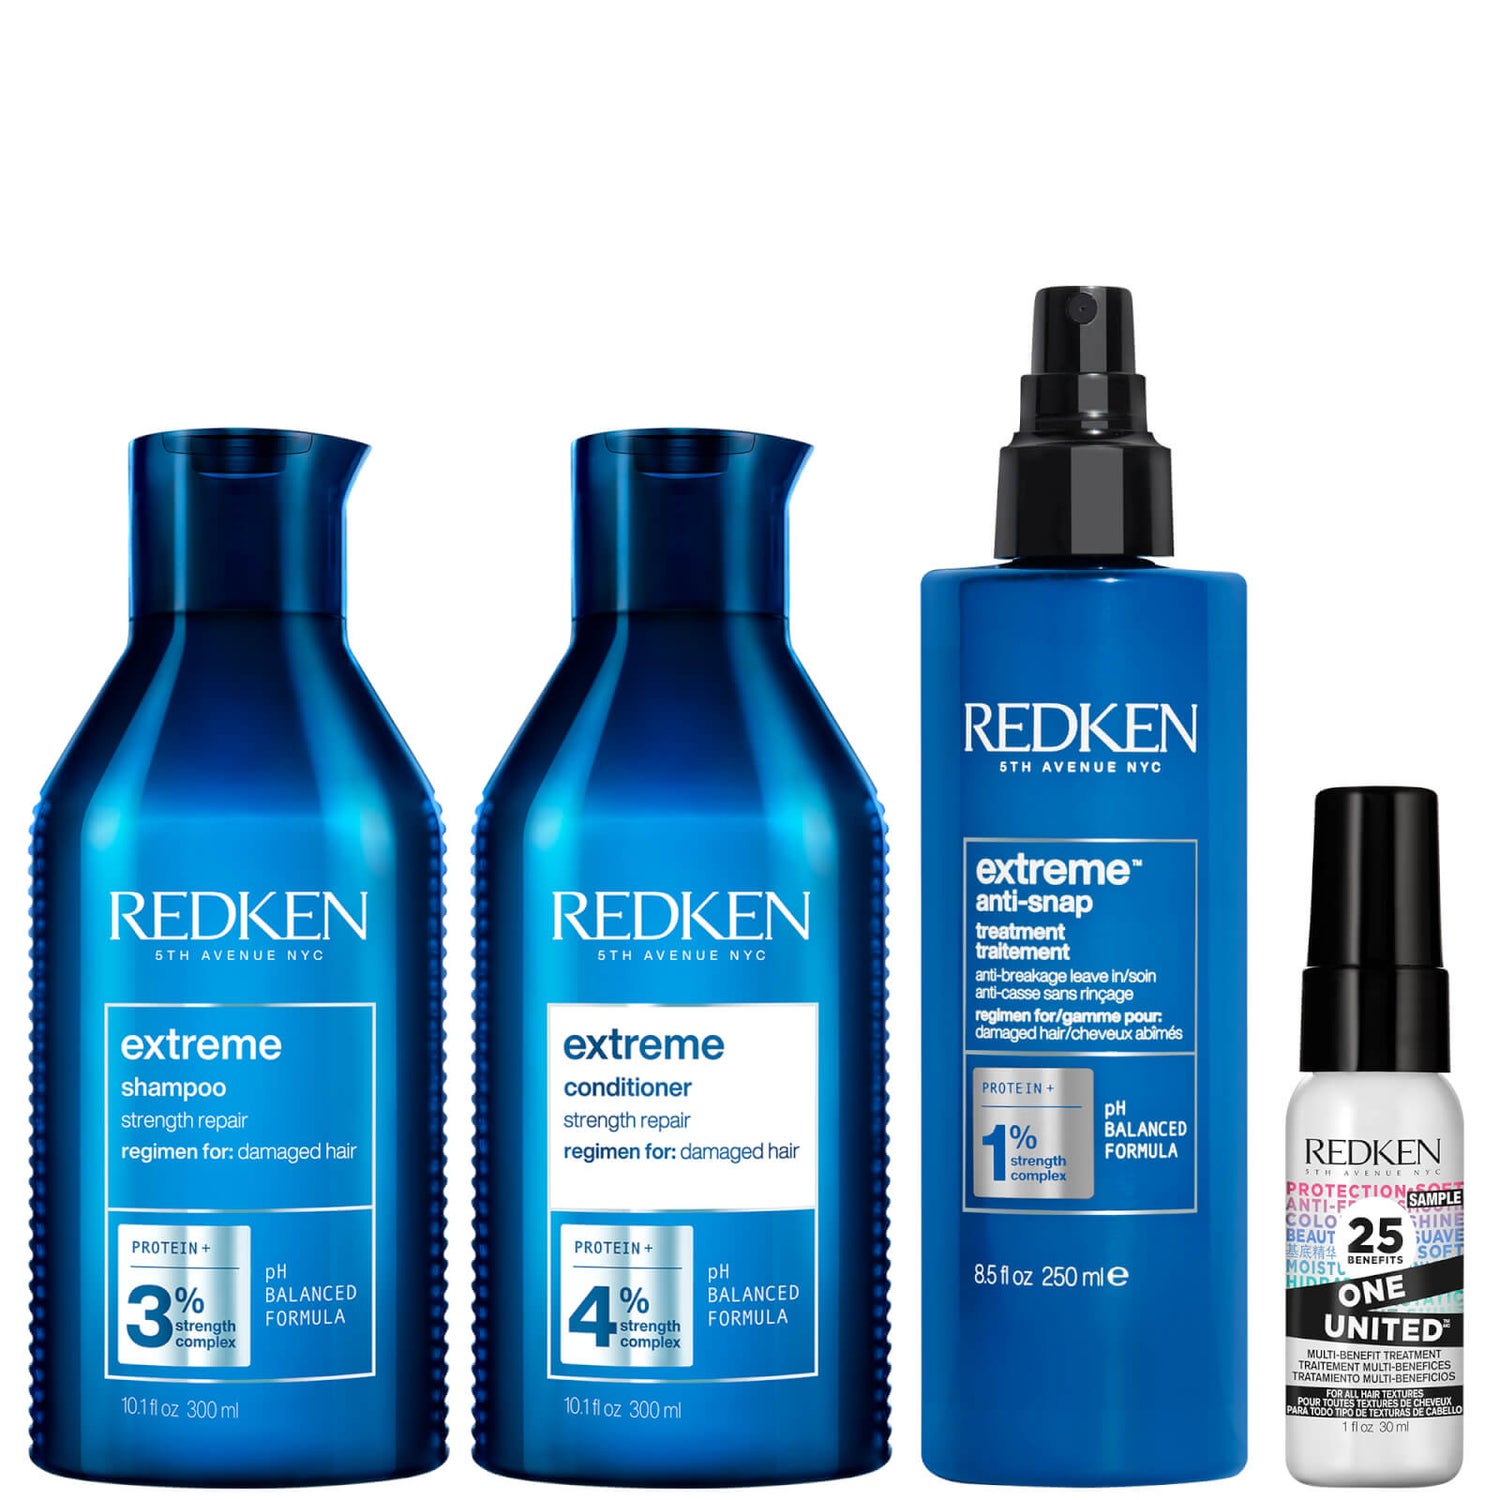 Redken Extreme Shampoo 300ml, Conditioner 300ml, Anti Snap 250ml and One United 30ml Bundle for Damaged Hair (Worth £76.32)